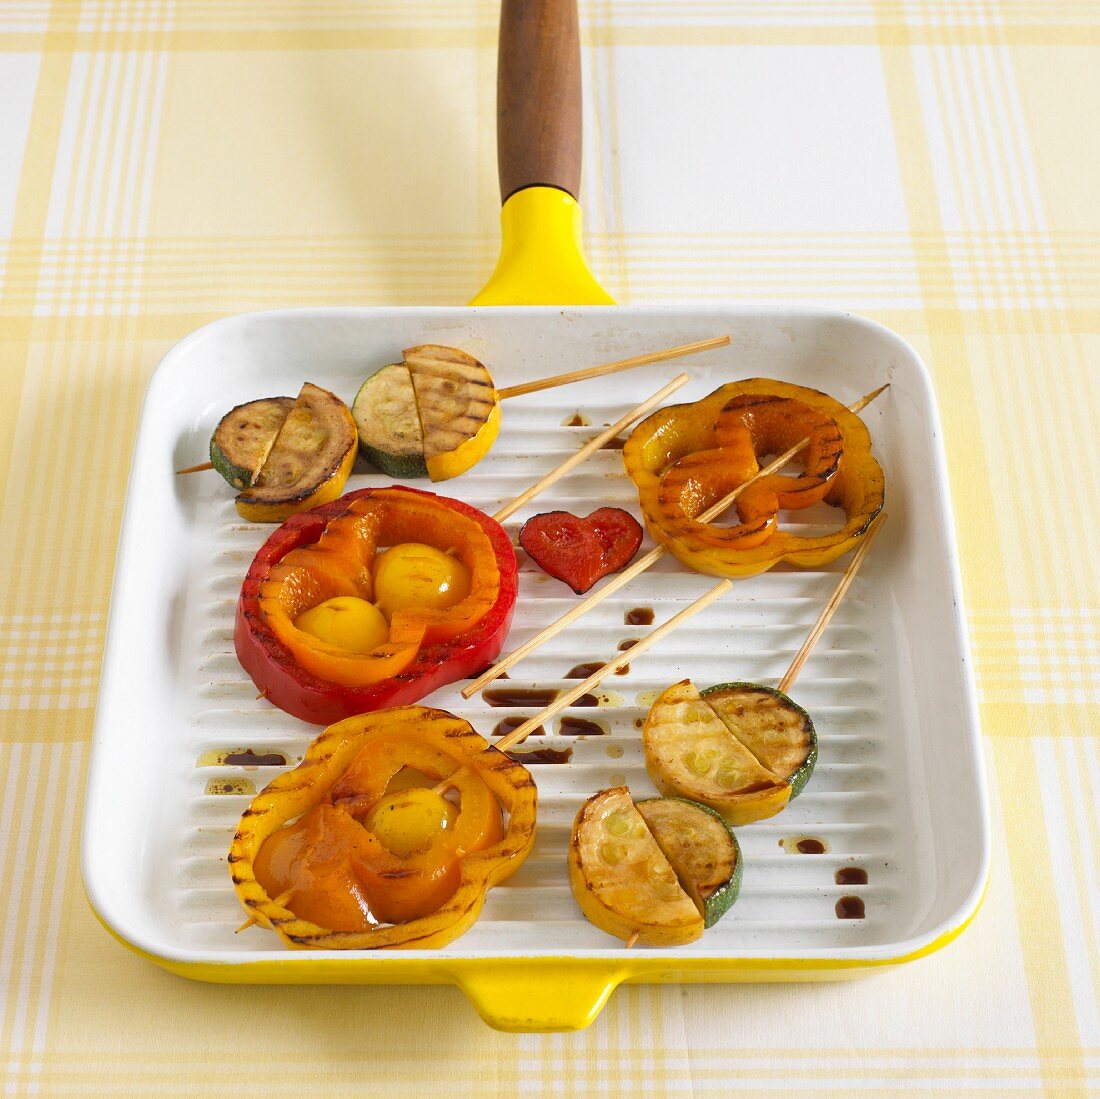 Grilled vegetable 'lollies'